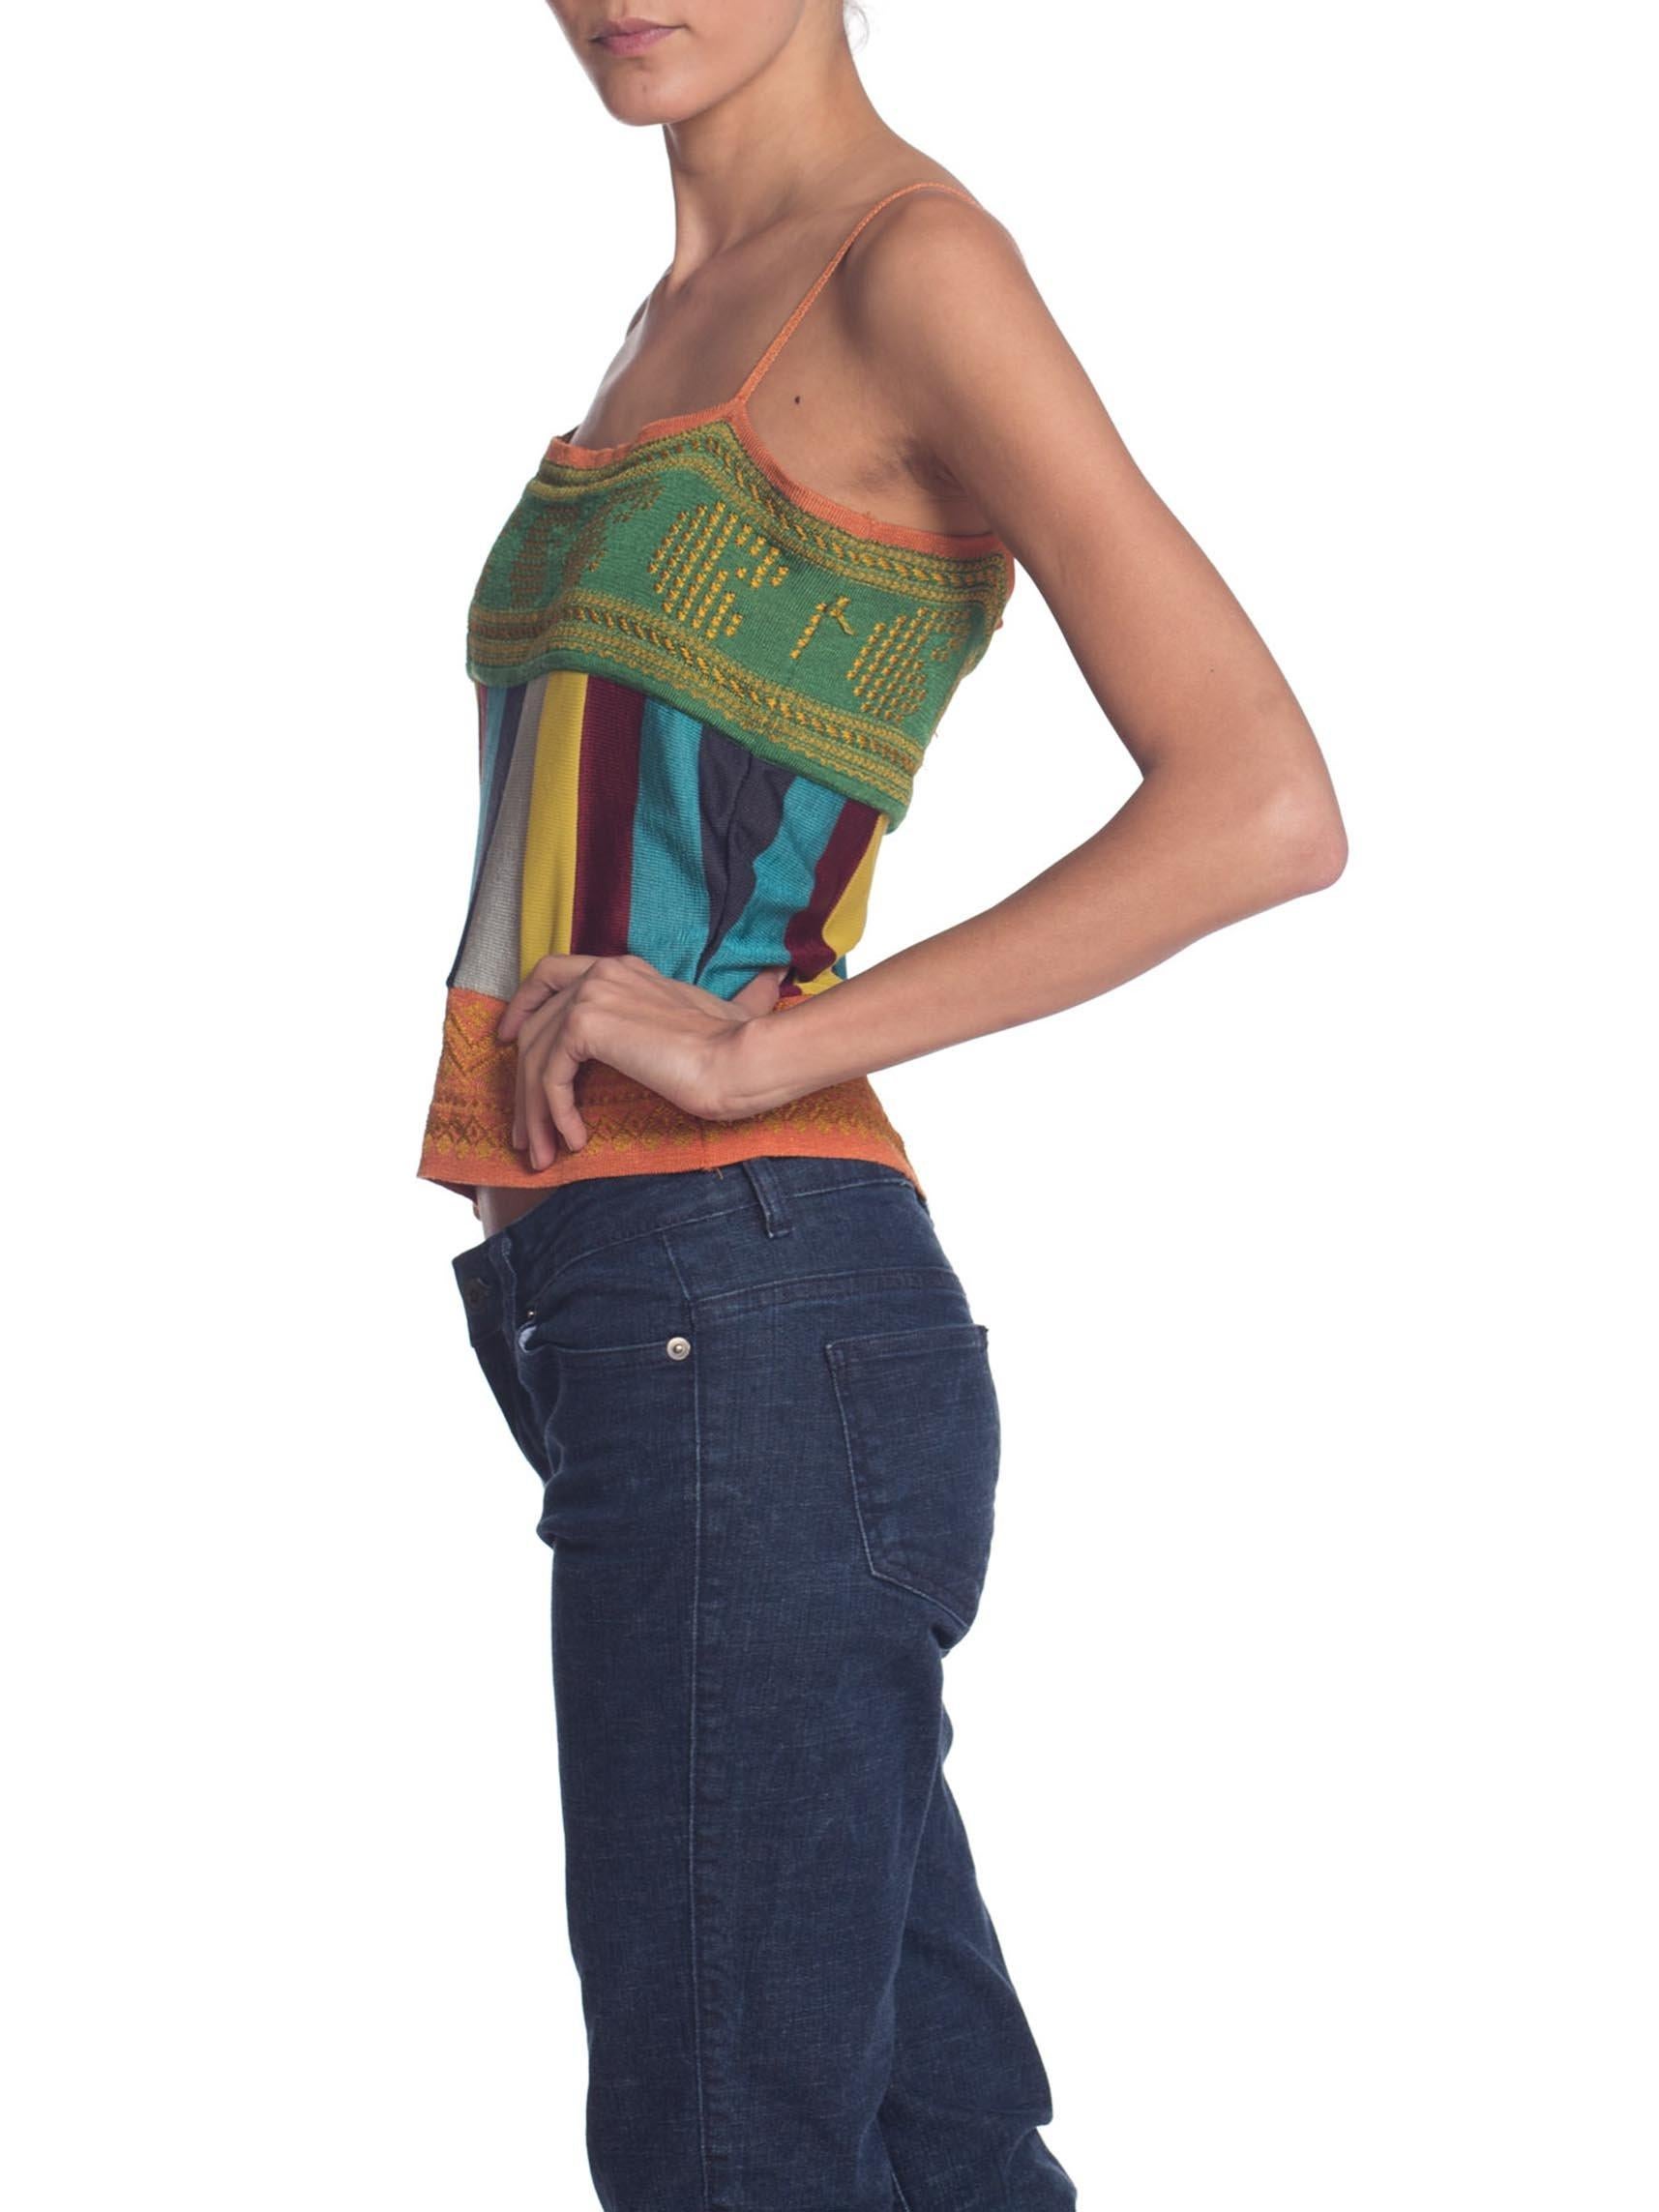 Women's 1990S JEAN PAUL GAULTIER Rayon Knit Indian Inspired Camisole